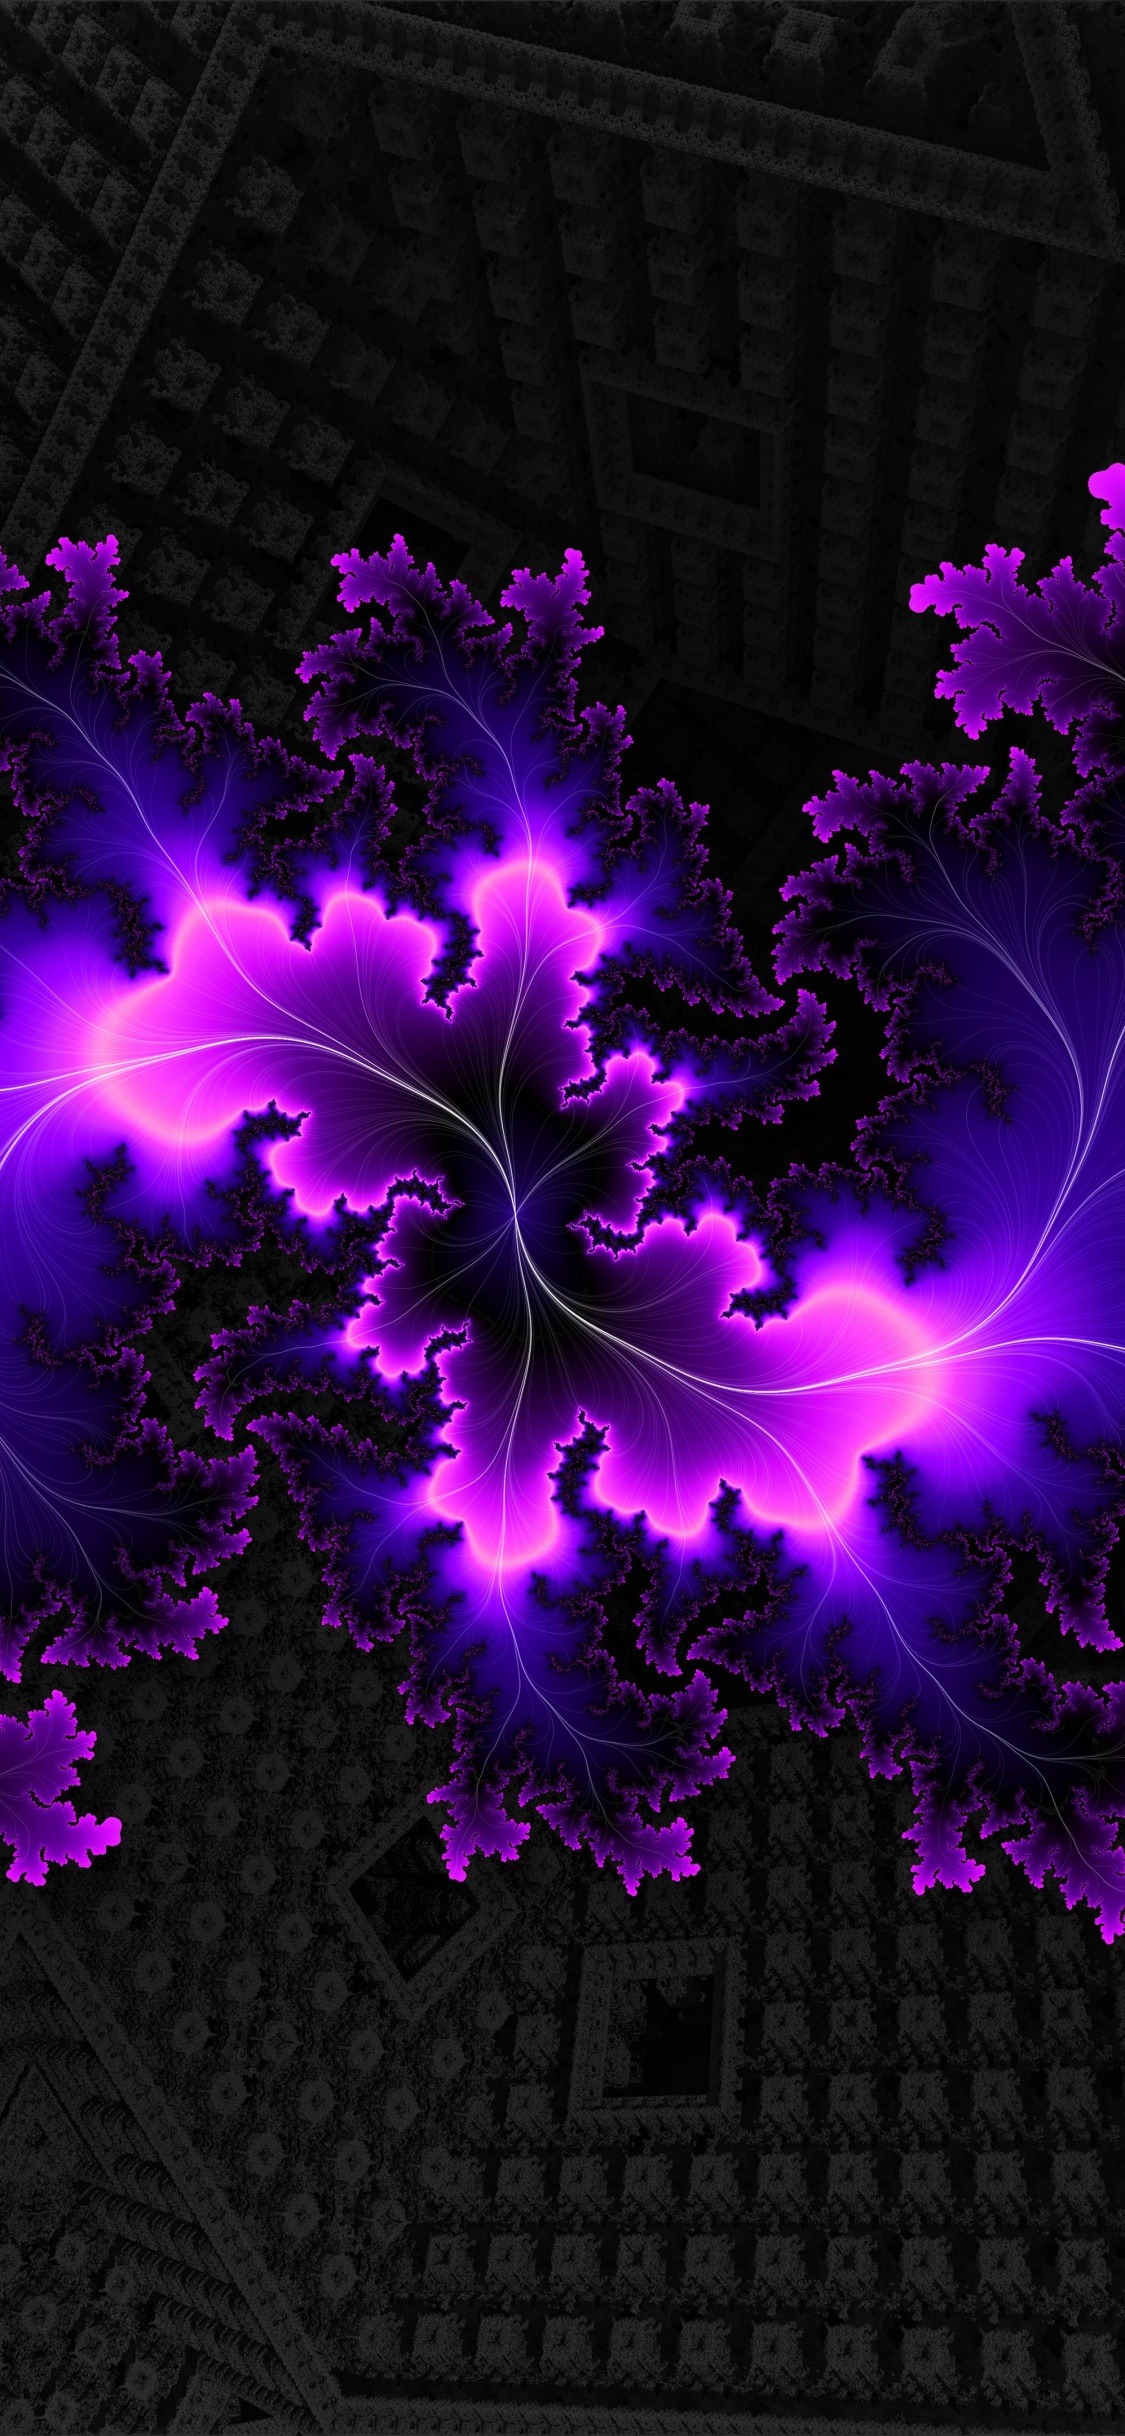 Purple Flower Petals on Black and White Textile. Wallpaper in 1125x2436 Resolution